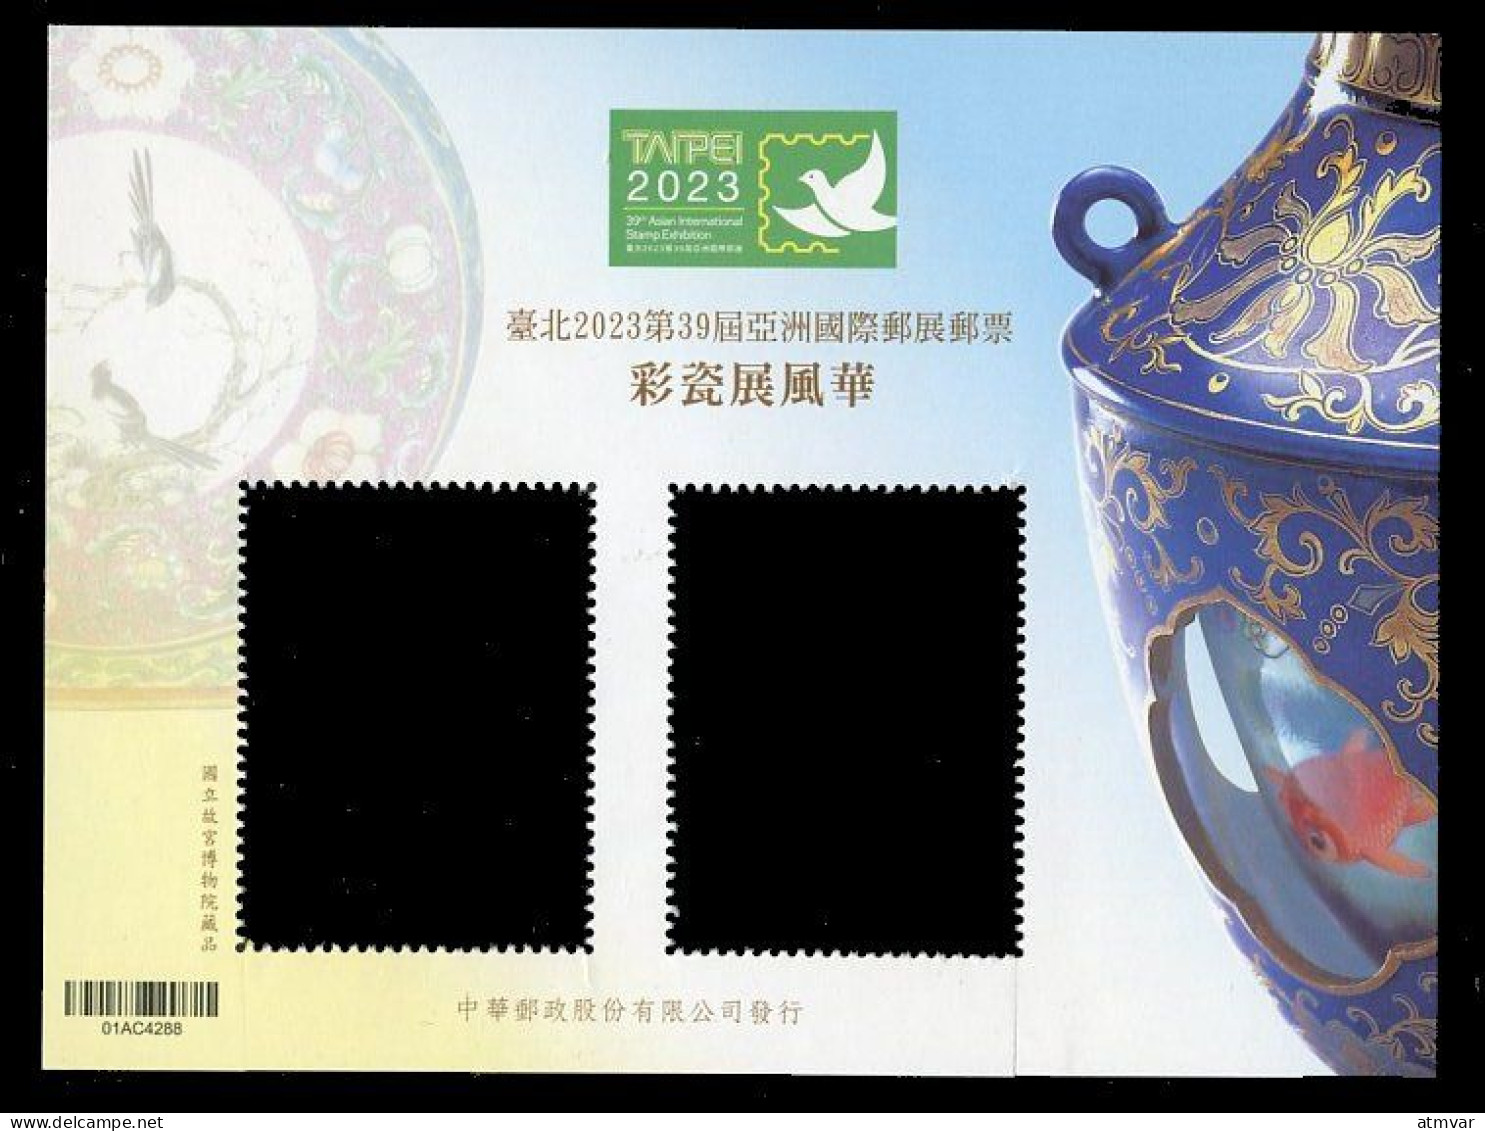 TAIWAN (2023) Cartes Maximum Cards - Taipei 2023 39th Asian Stamp Exhibition, Artistic Vases, Porcelain, Qing Dynasty - Porcelana